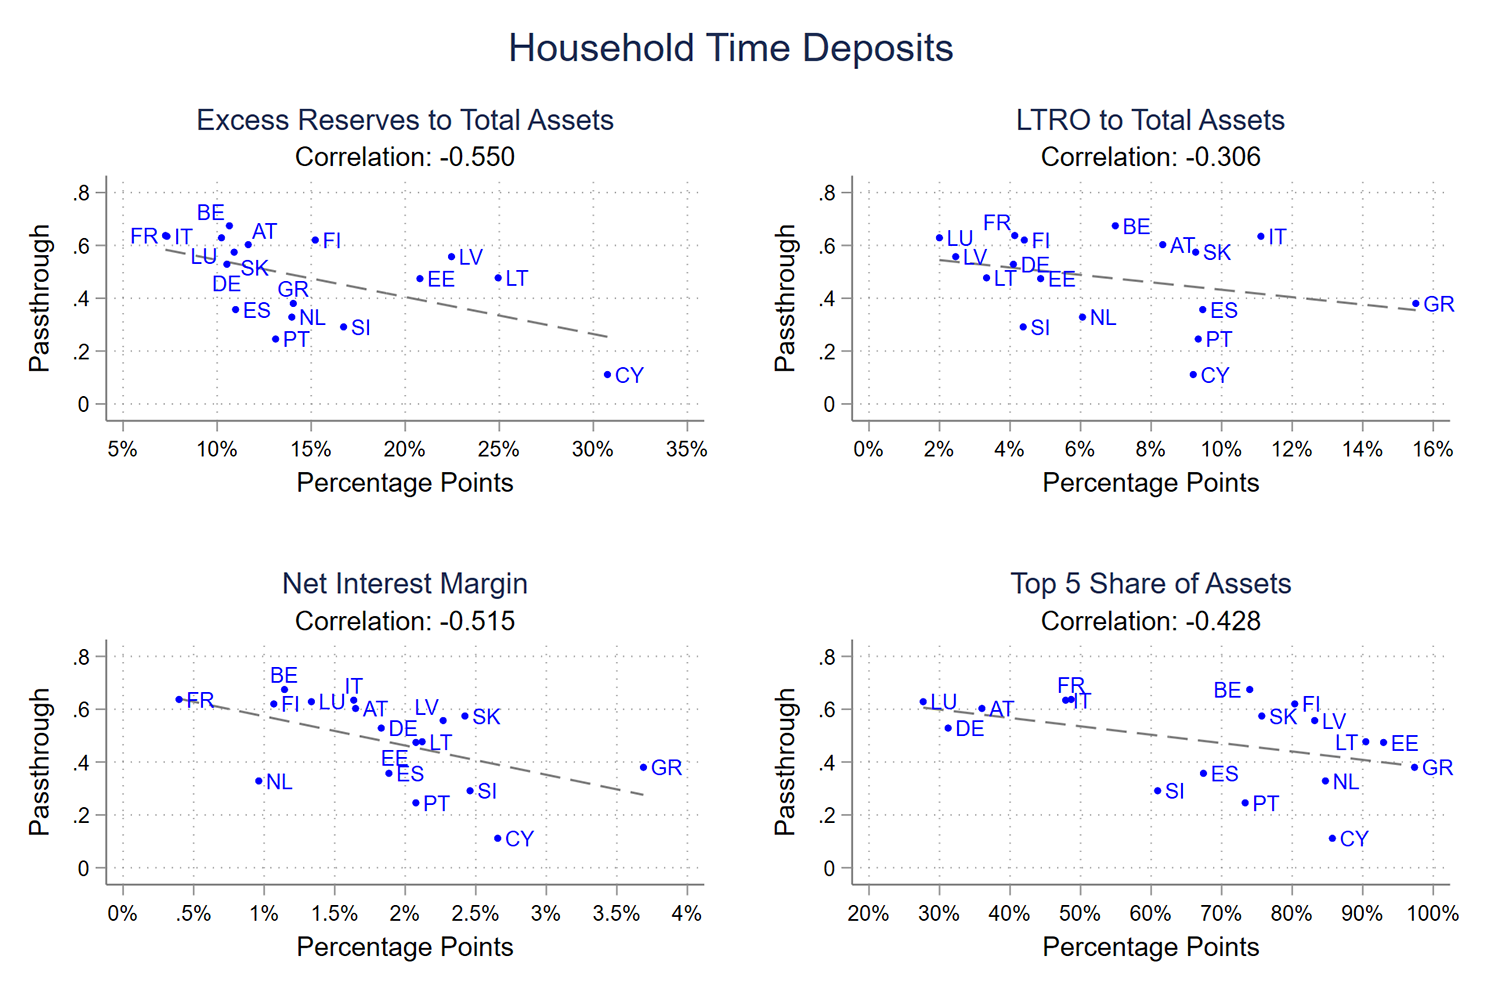 Figure 5. Correlations of Household Time Deposit Passthrough with Measures of the Banking System. See accessible link for data.